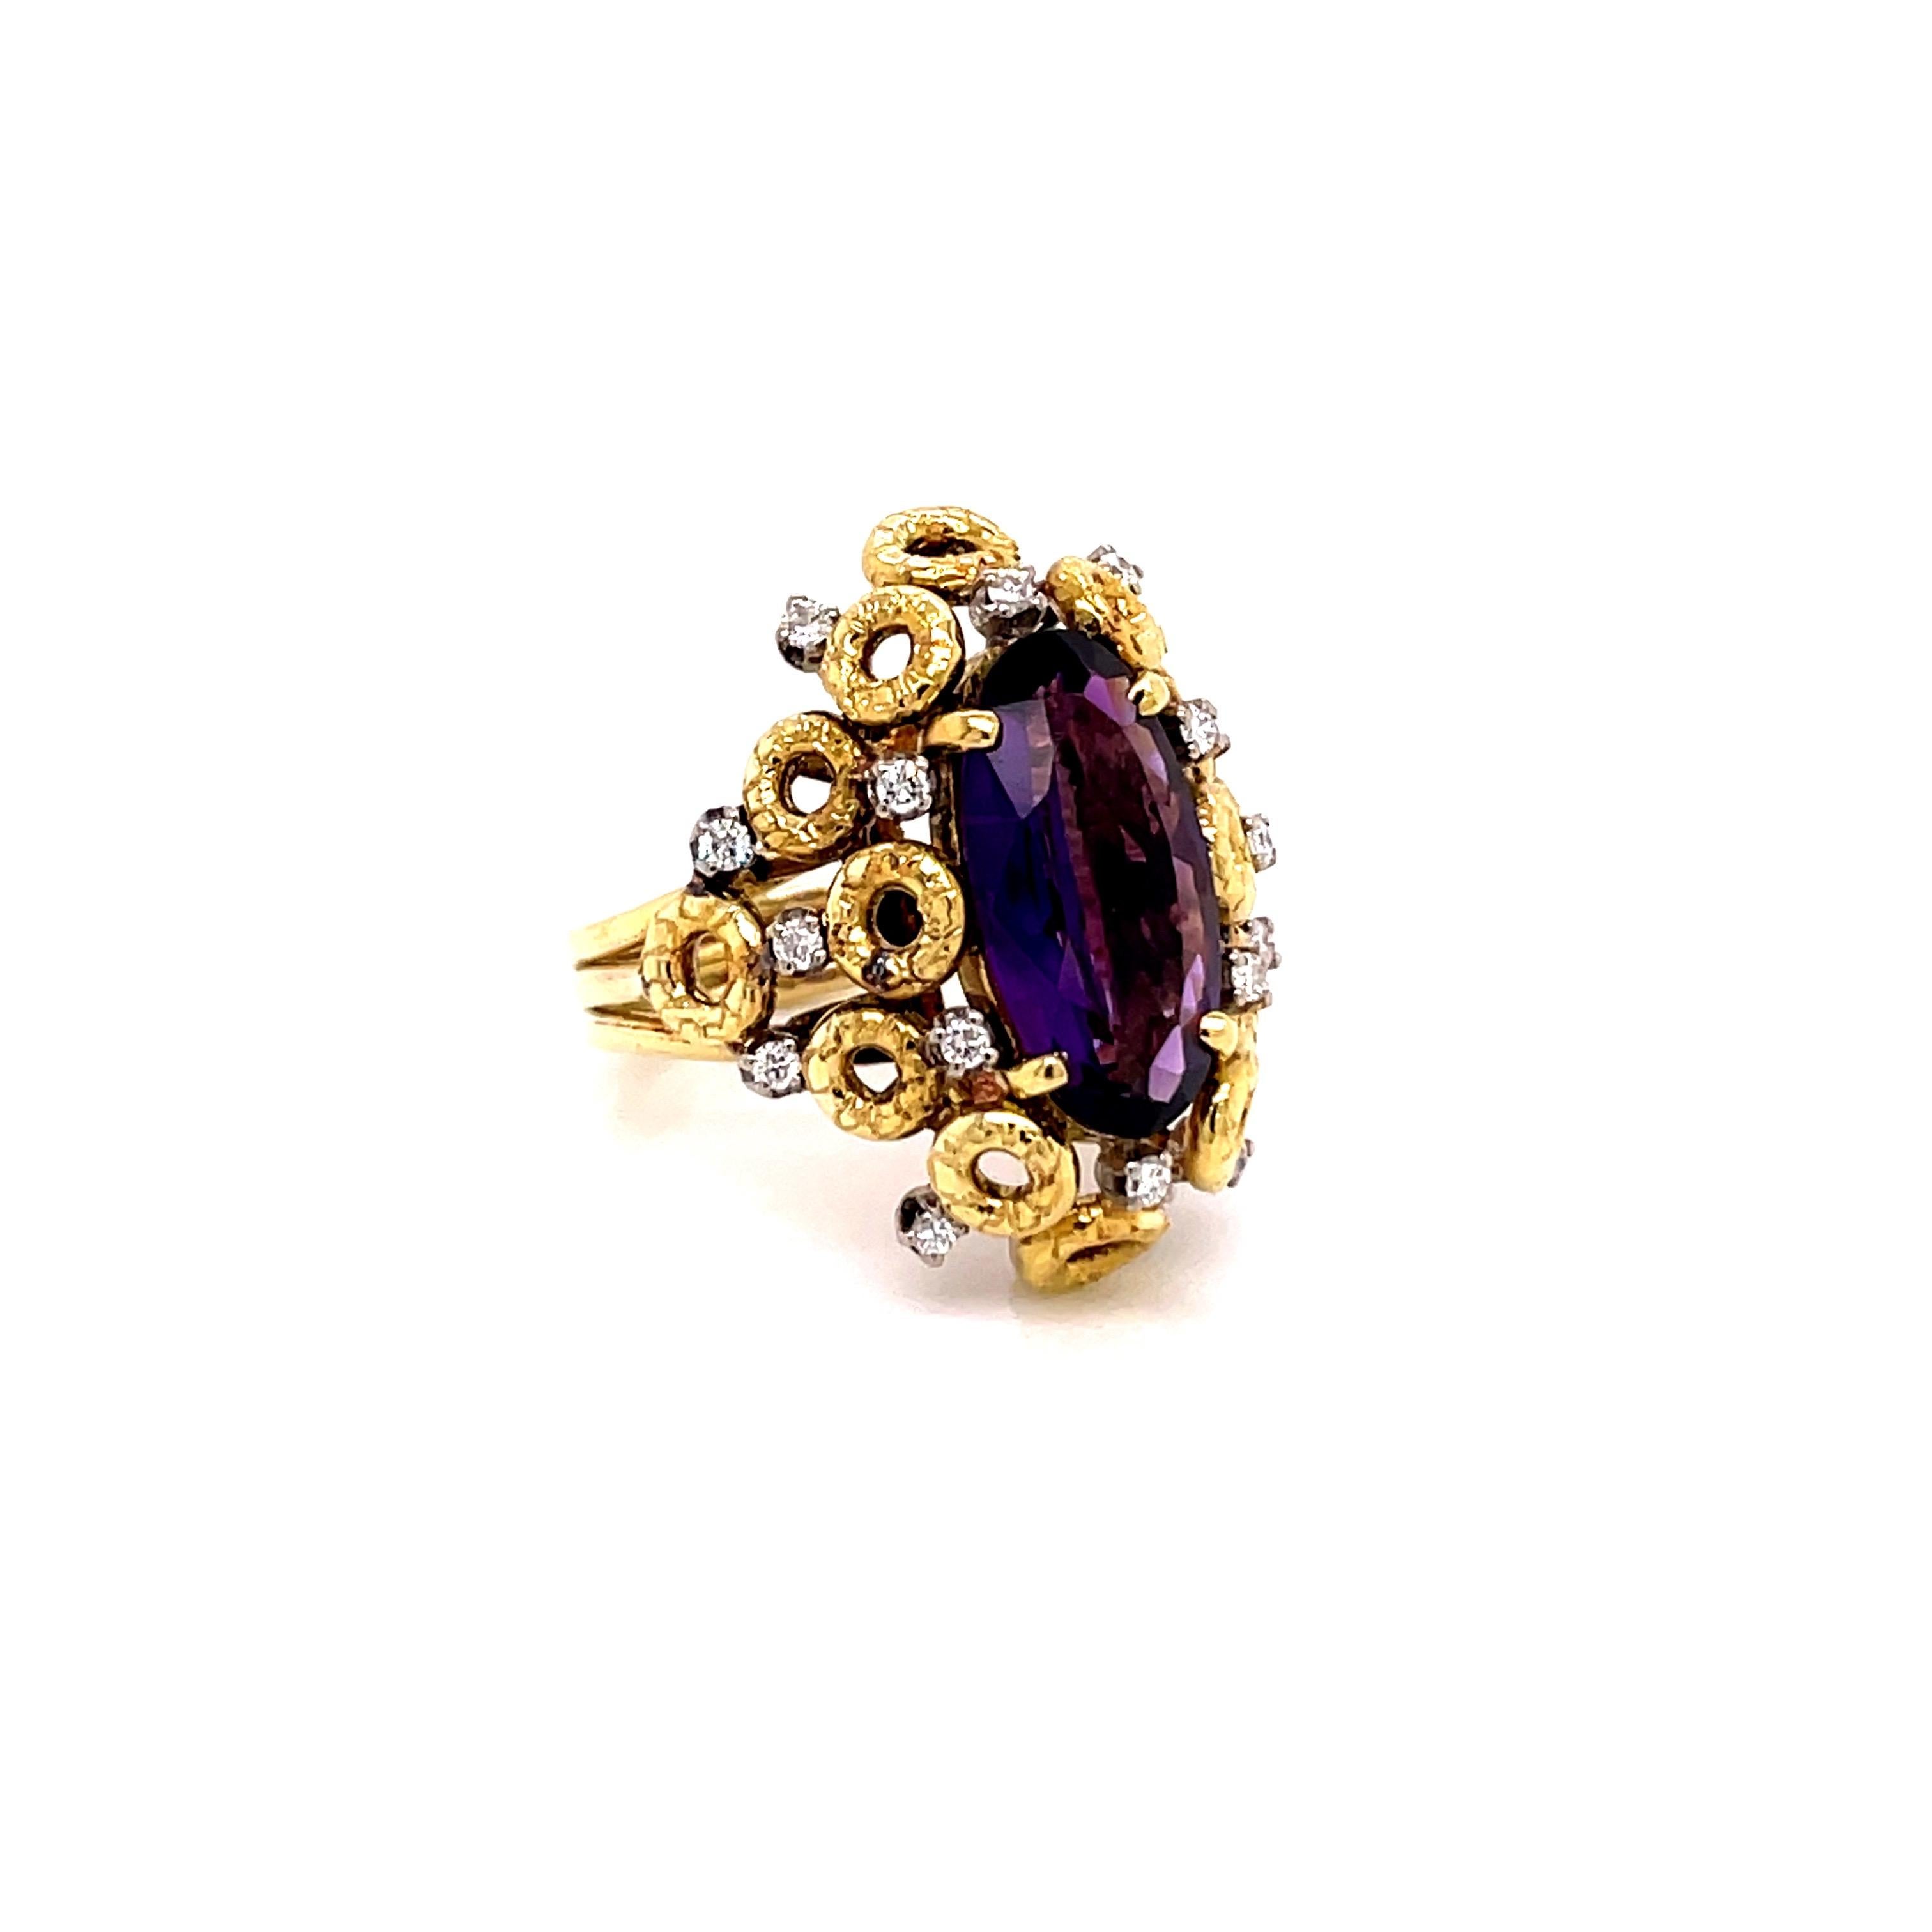 Vintage 1980's 3ct Oval Cut Amethyst Ring with Diamonds - the amethyst weighs approximately 3ct and measures 16 x 8mm.  It is accented with 16 round brilliant diamonds weighing approximately .25ct G - H color and VS2 - SI1 clarity.  The setting is